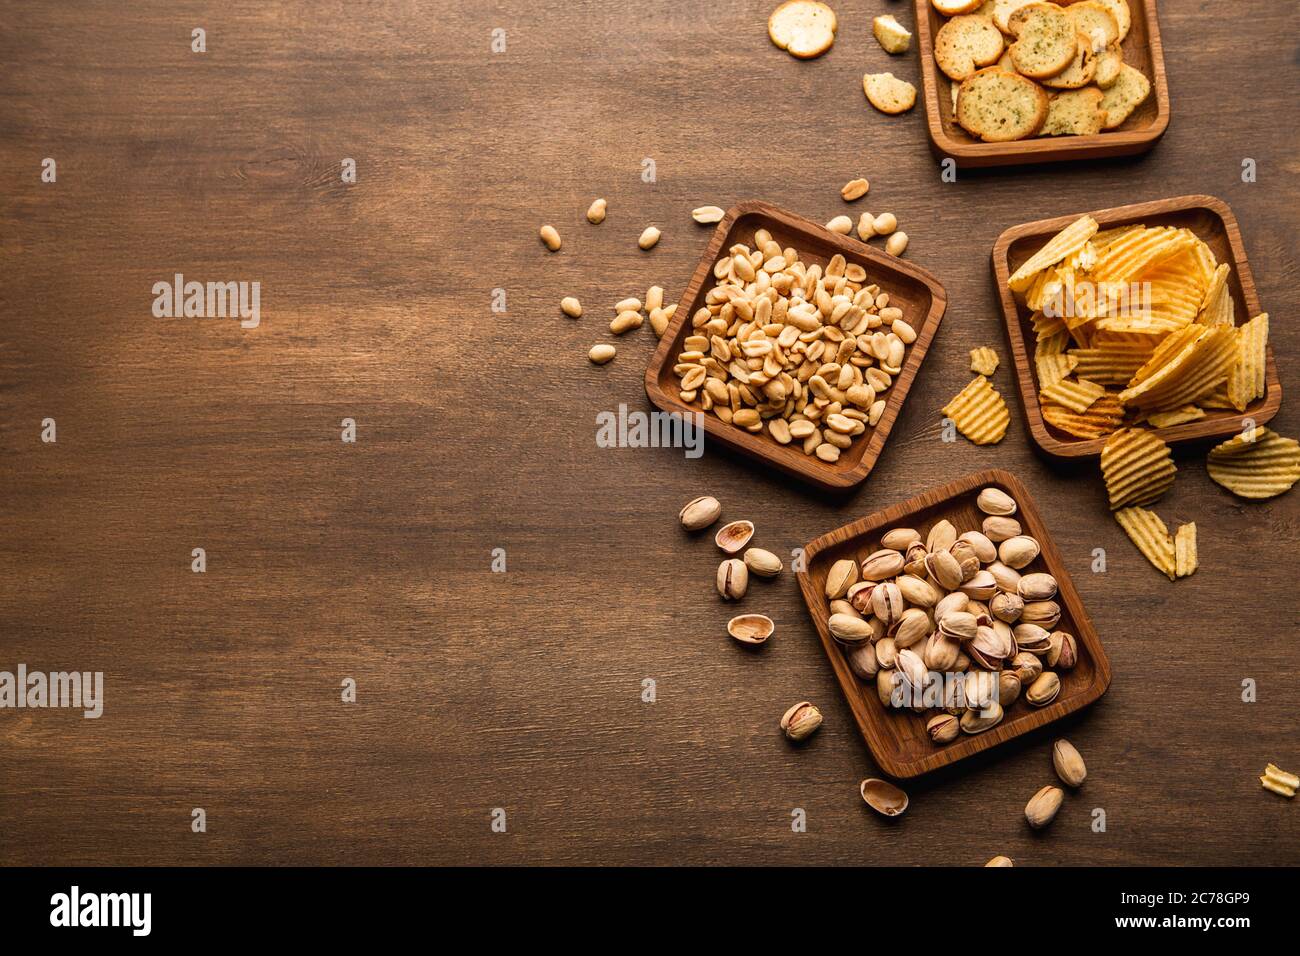 Crispy snacks on background. Pistachios, nuts, crisps and chips in plate and scattered on table Stock Photo